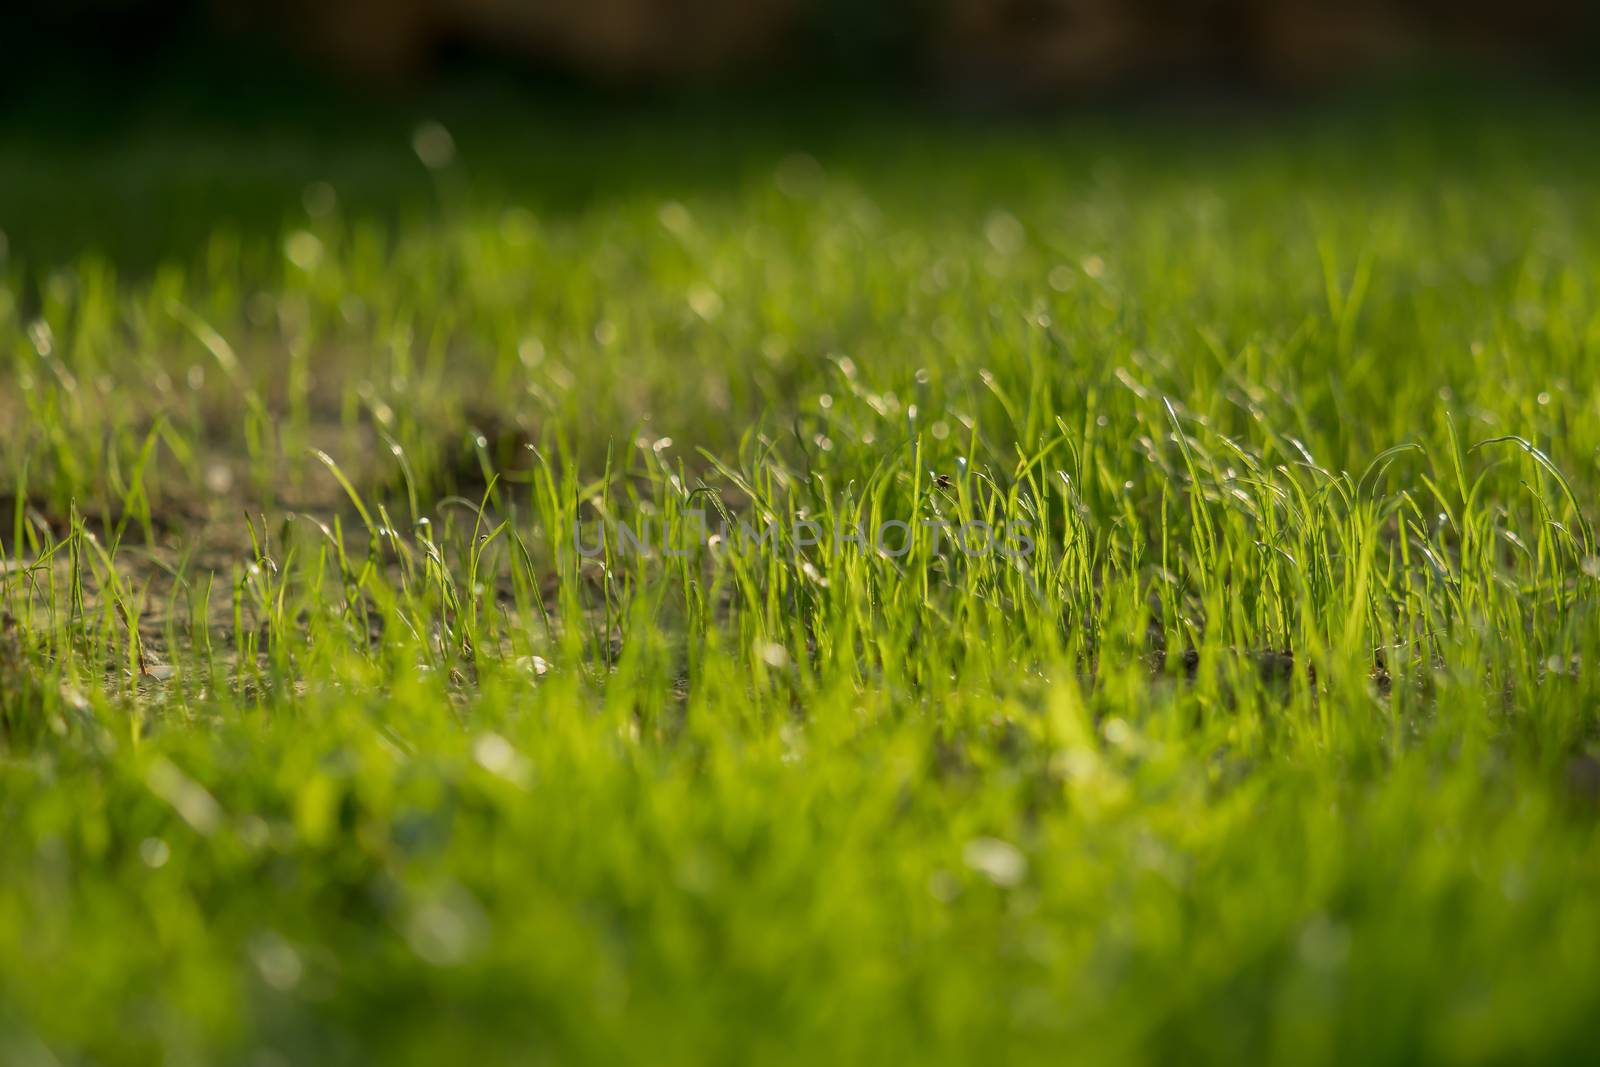 New grass grows outside in the garden by sandra_fotodesign